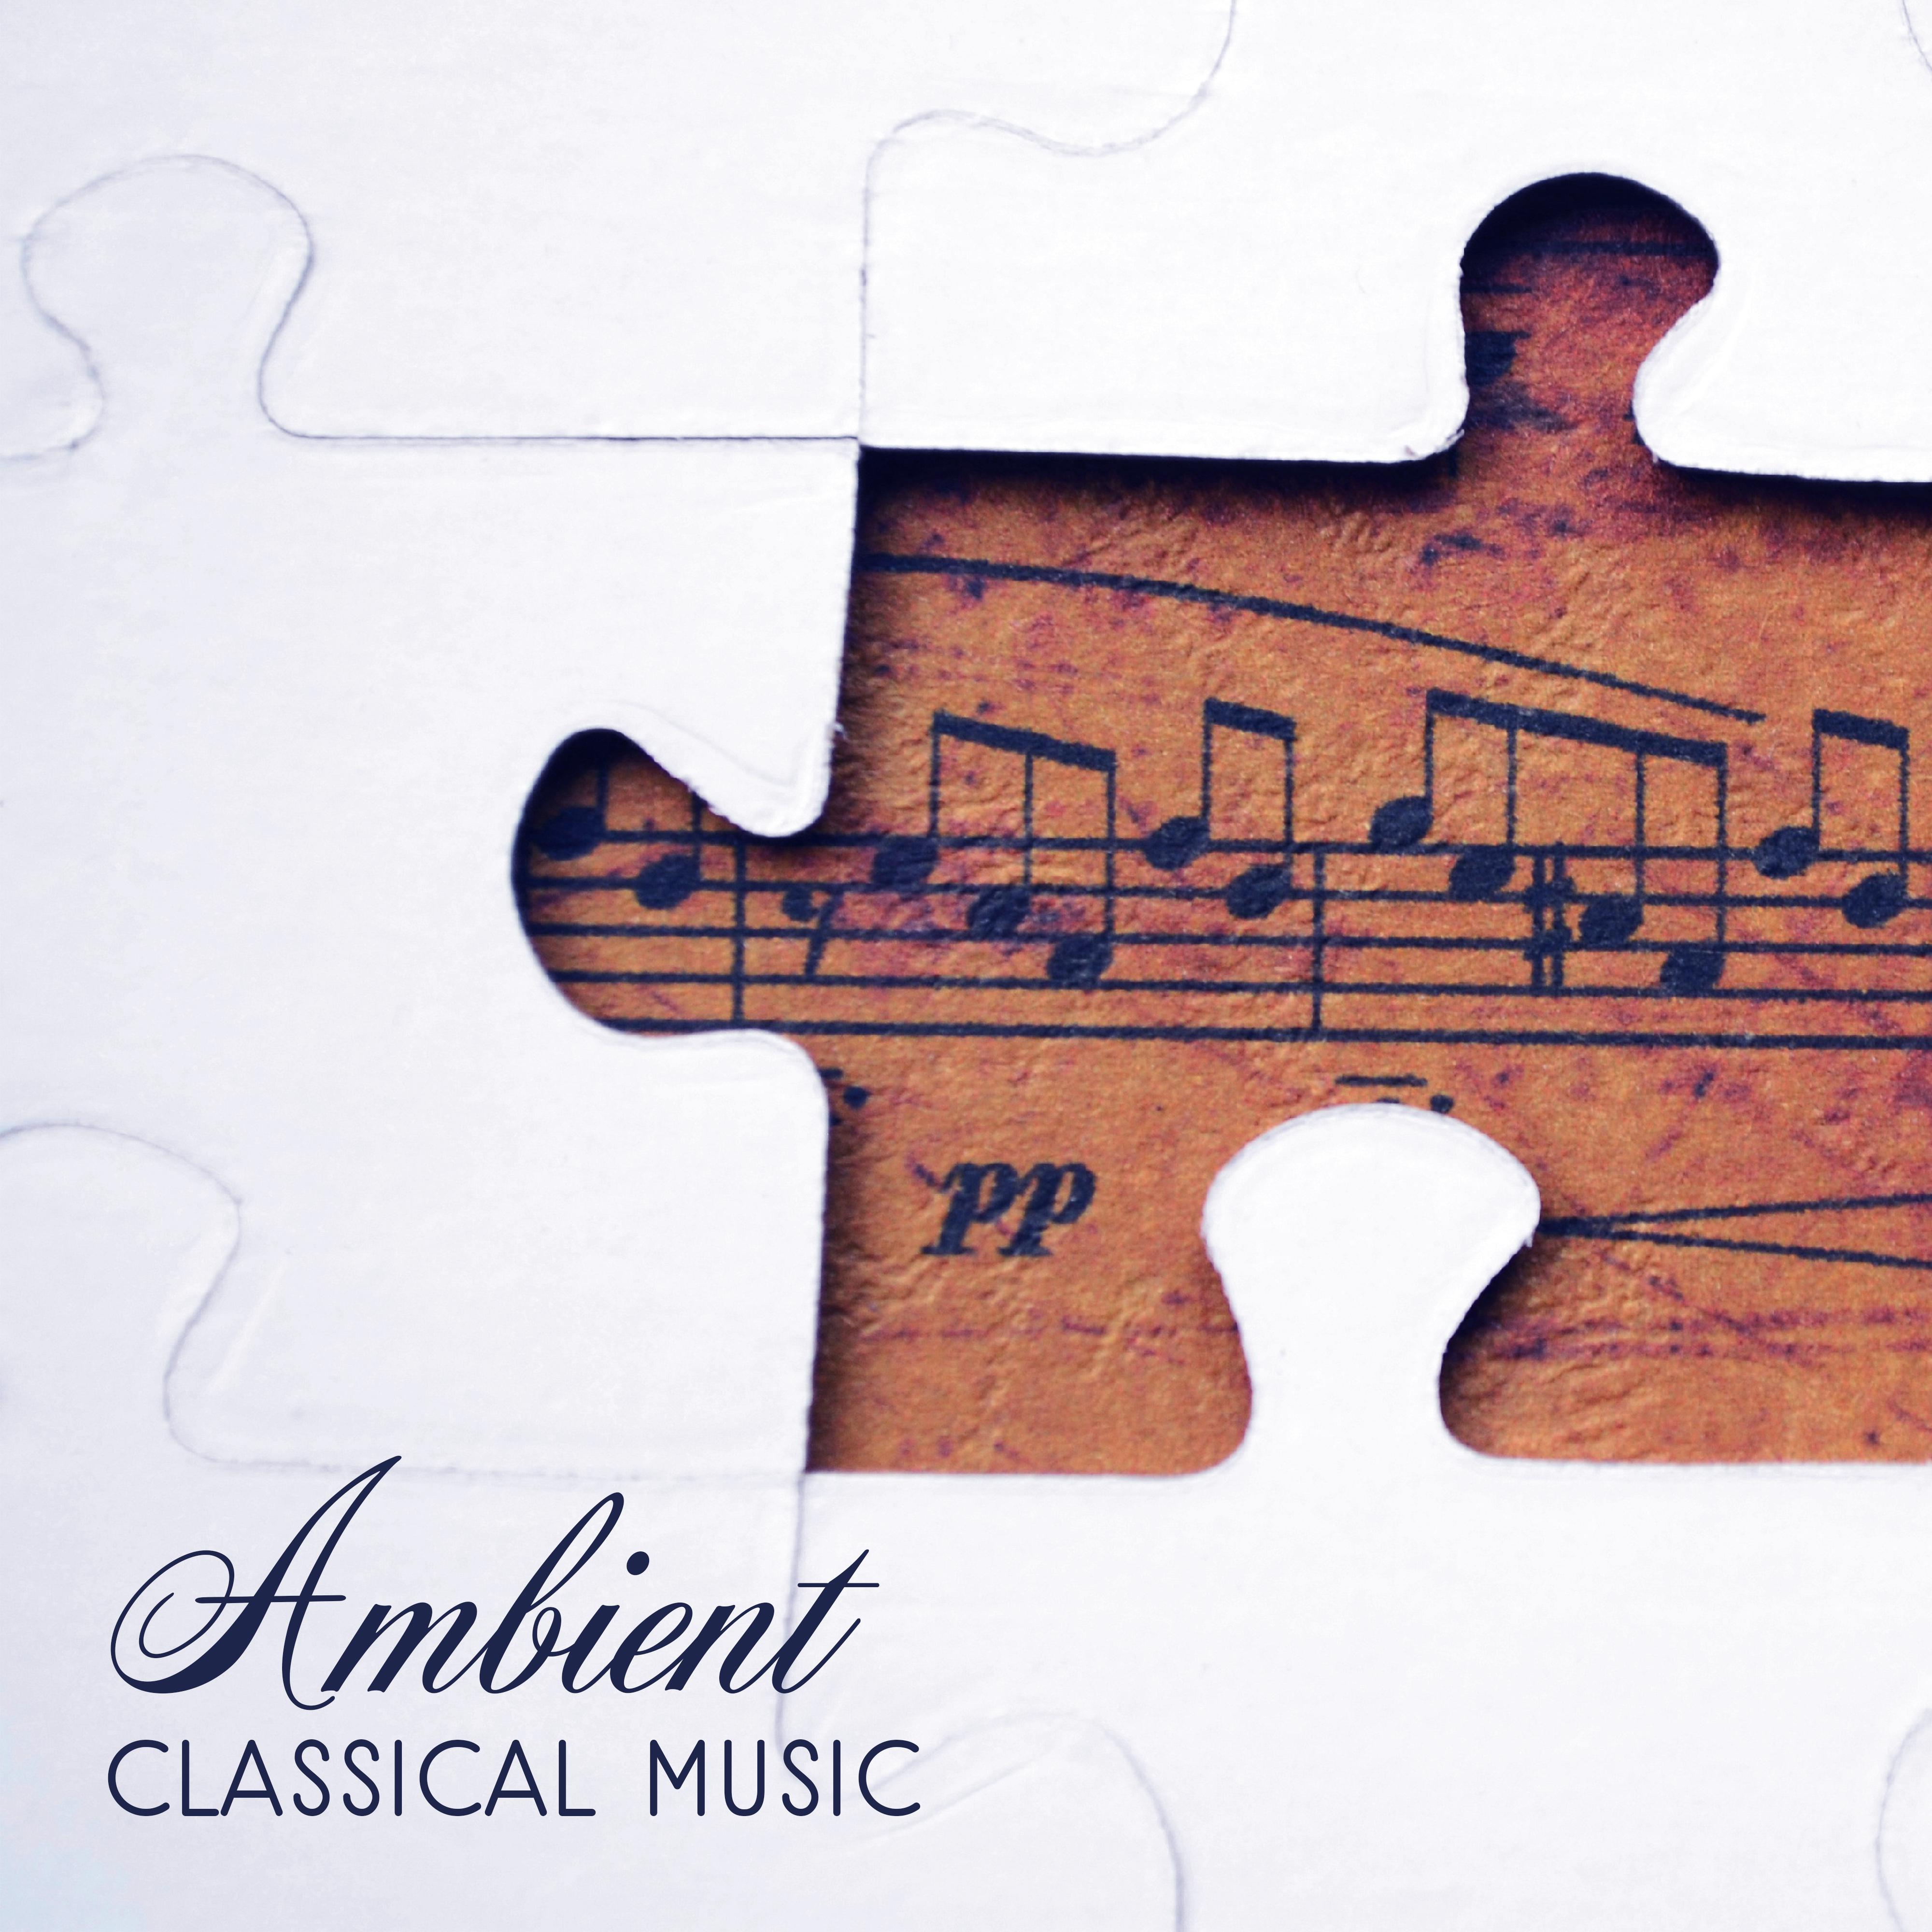 Ambient Classical Music  Relaxing Piano, Classical Music of Bach, Schubert, Mozart